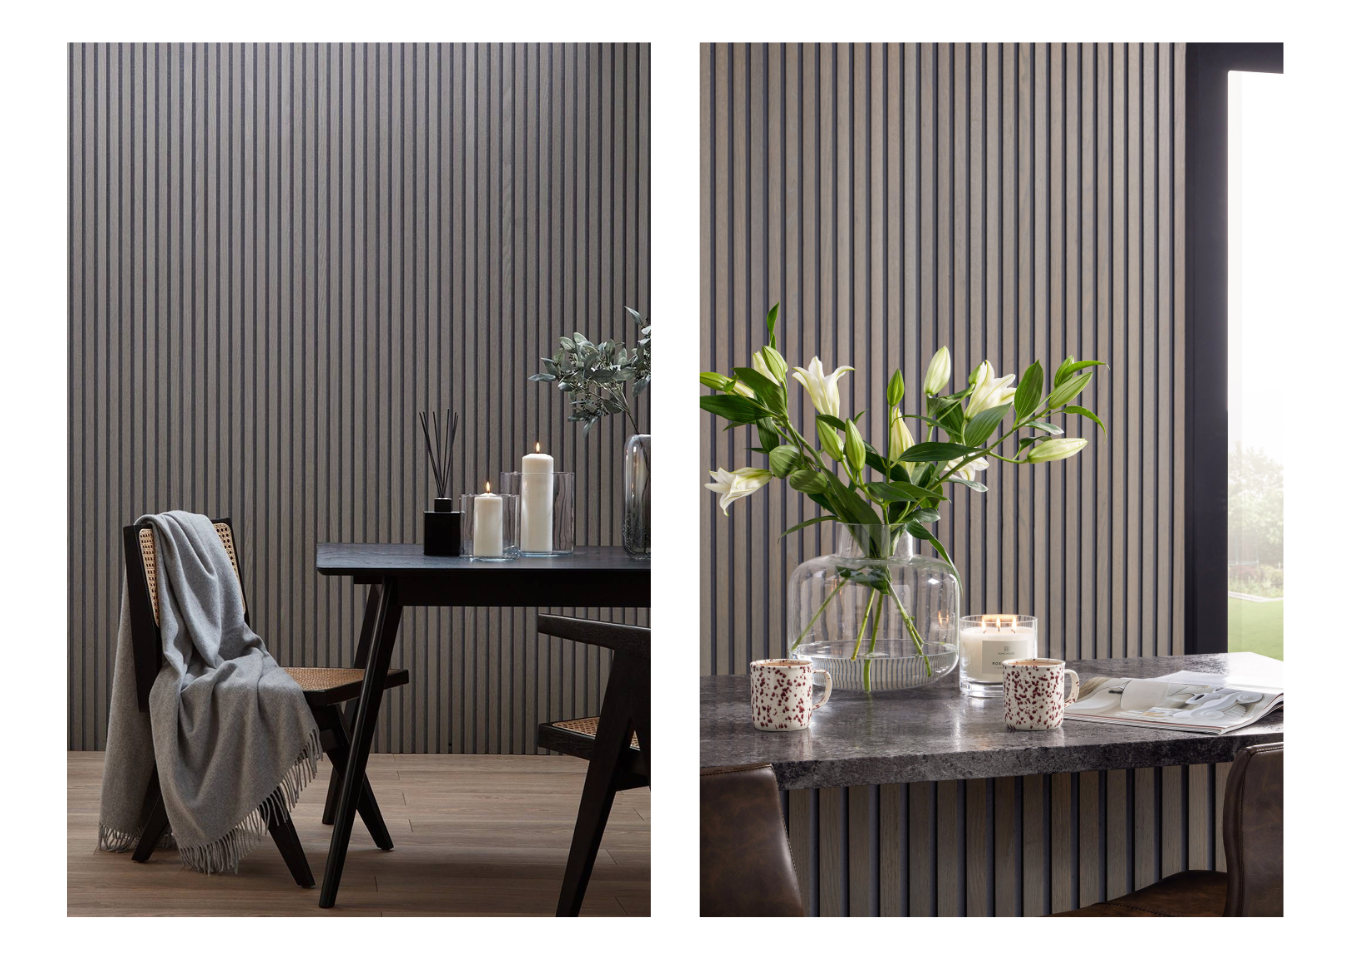 Two images with a Grey Oak SlatWall background. The image on the left shows a dining table and with dining chair and a blanket draped over. The image on the right shows a kitchen with the same SlatWall in the background. There is a kitchen island with two mugs, an open magazine and a vase with white lilies.